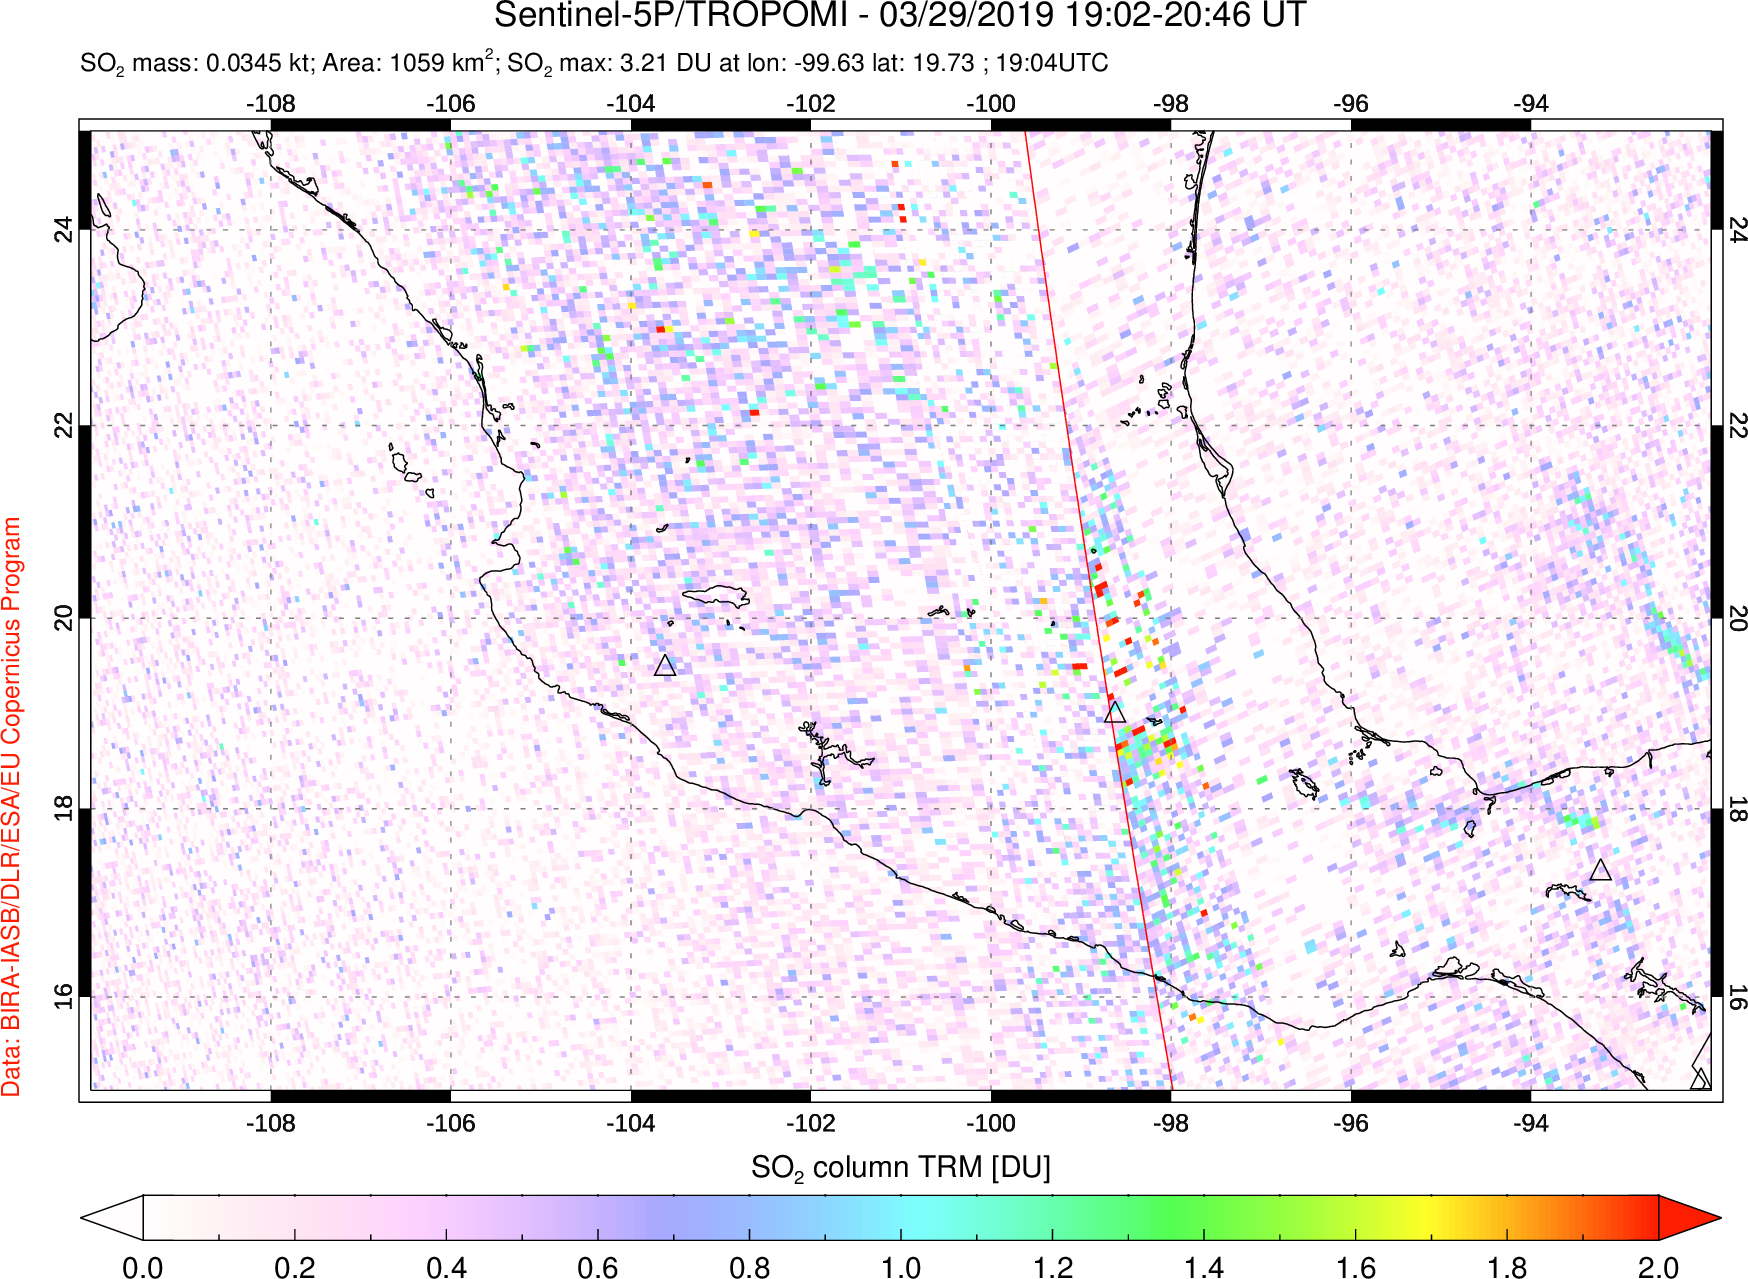 A sulfur dioxide image over Mexico on Mar 29, 2019.